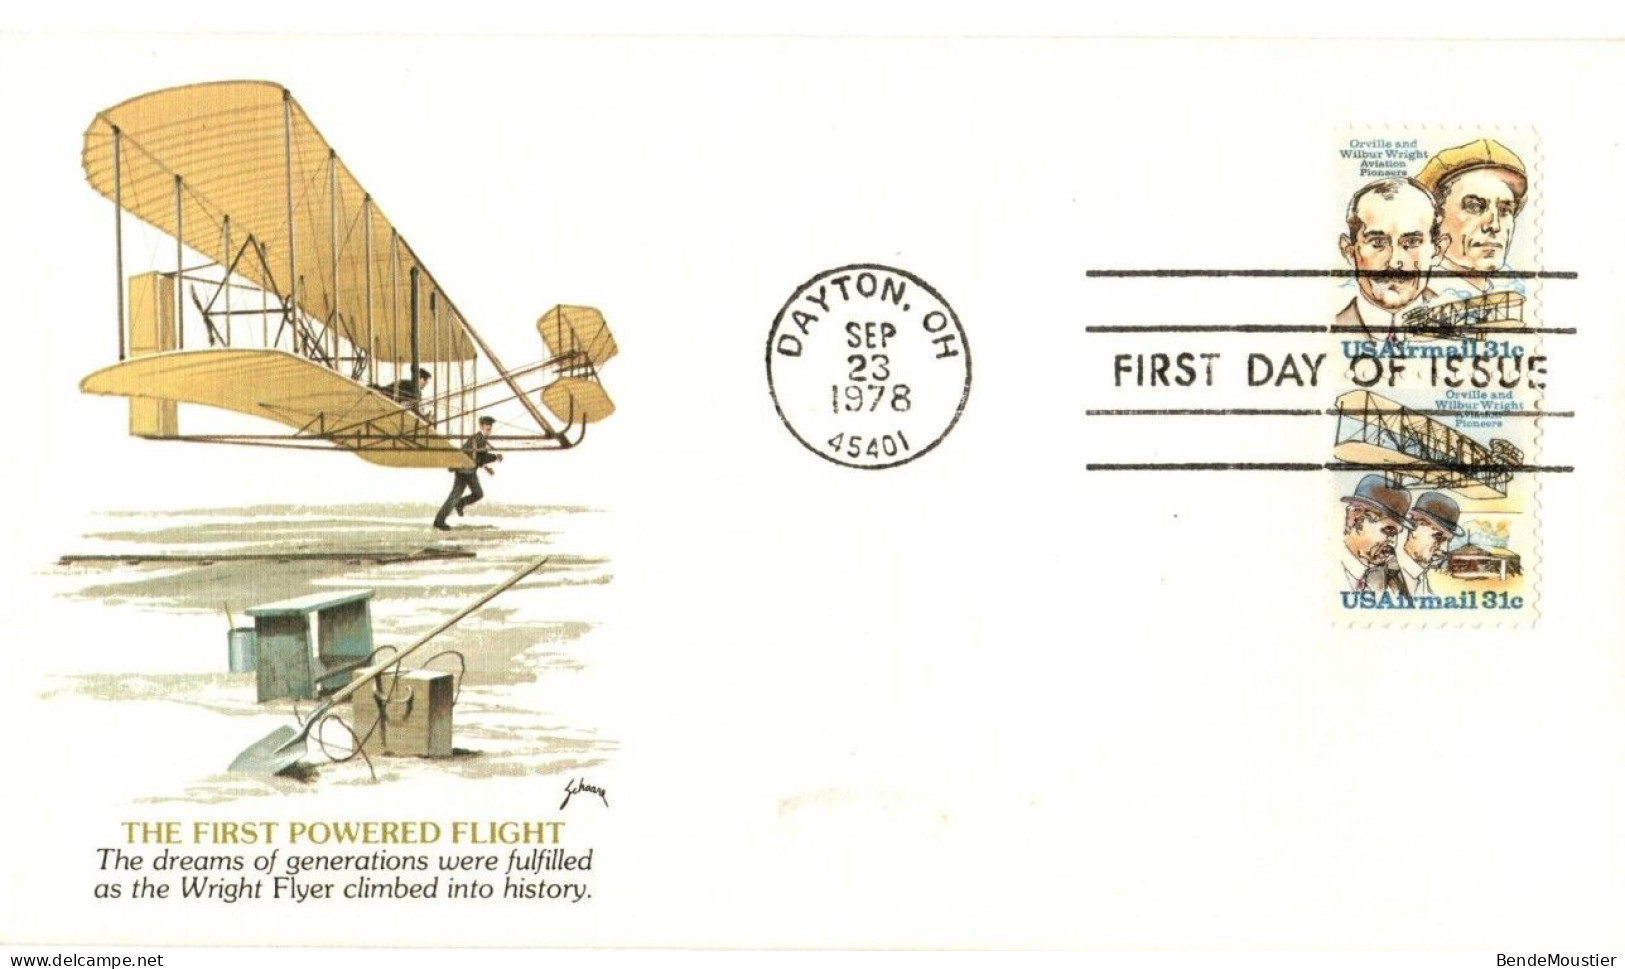 (R19a) USA FDI - The First Powered Flight - Orville And Wilbur Wright - Dayton OH 1978. - 3c. 1961-... Covers